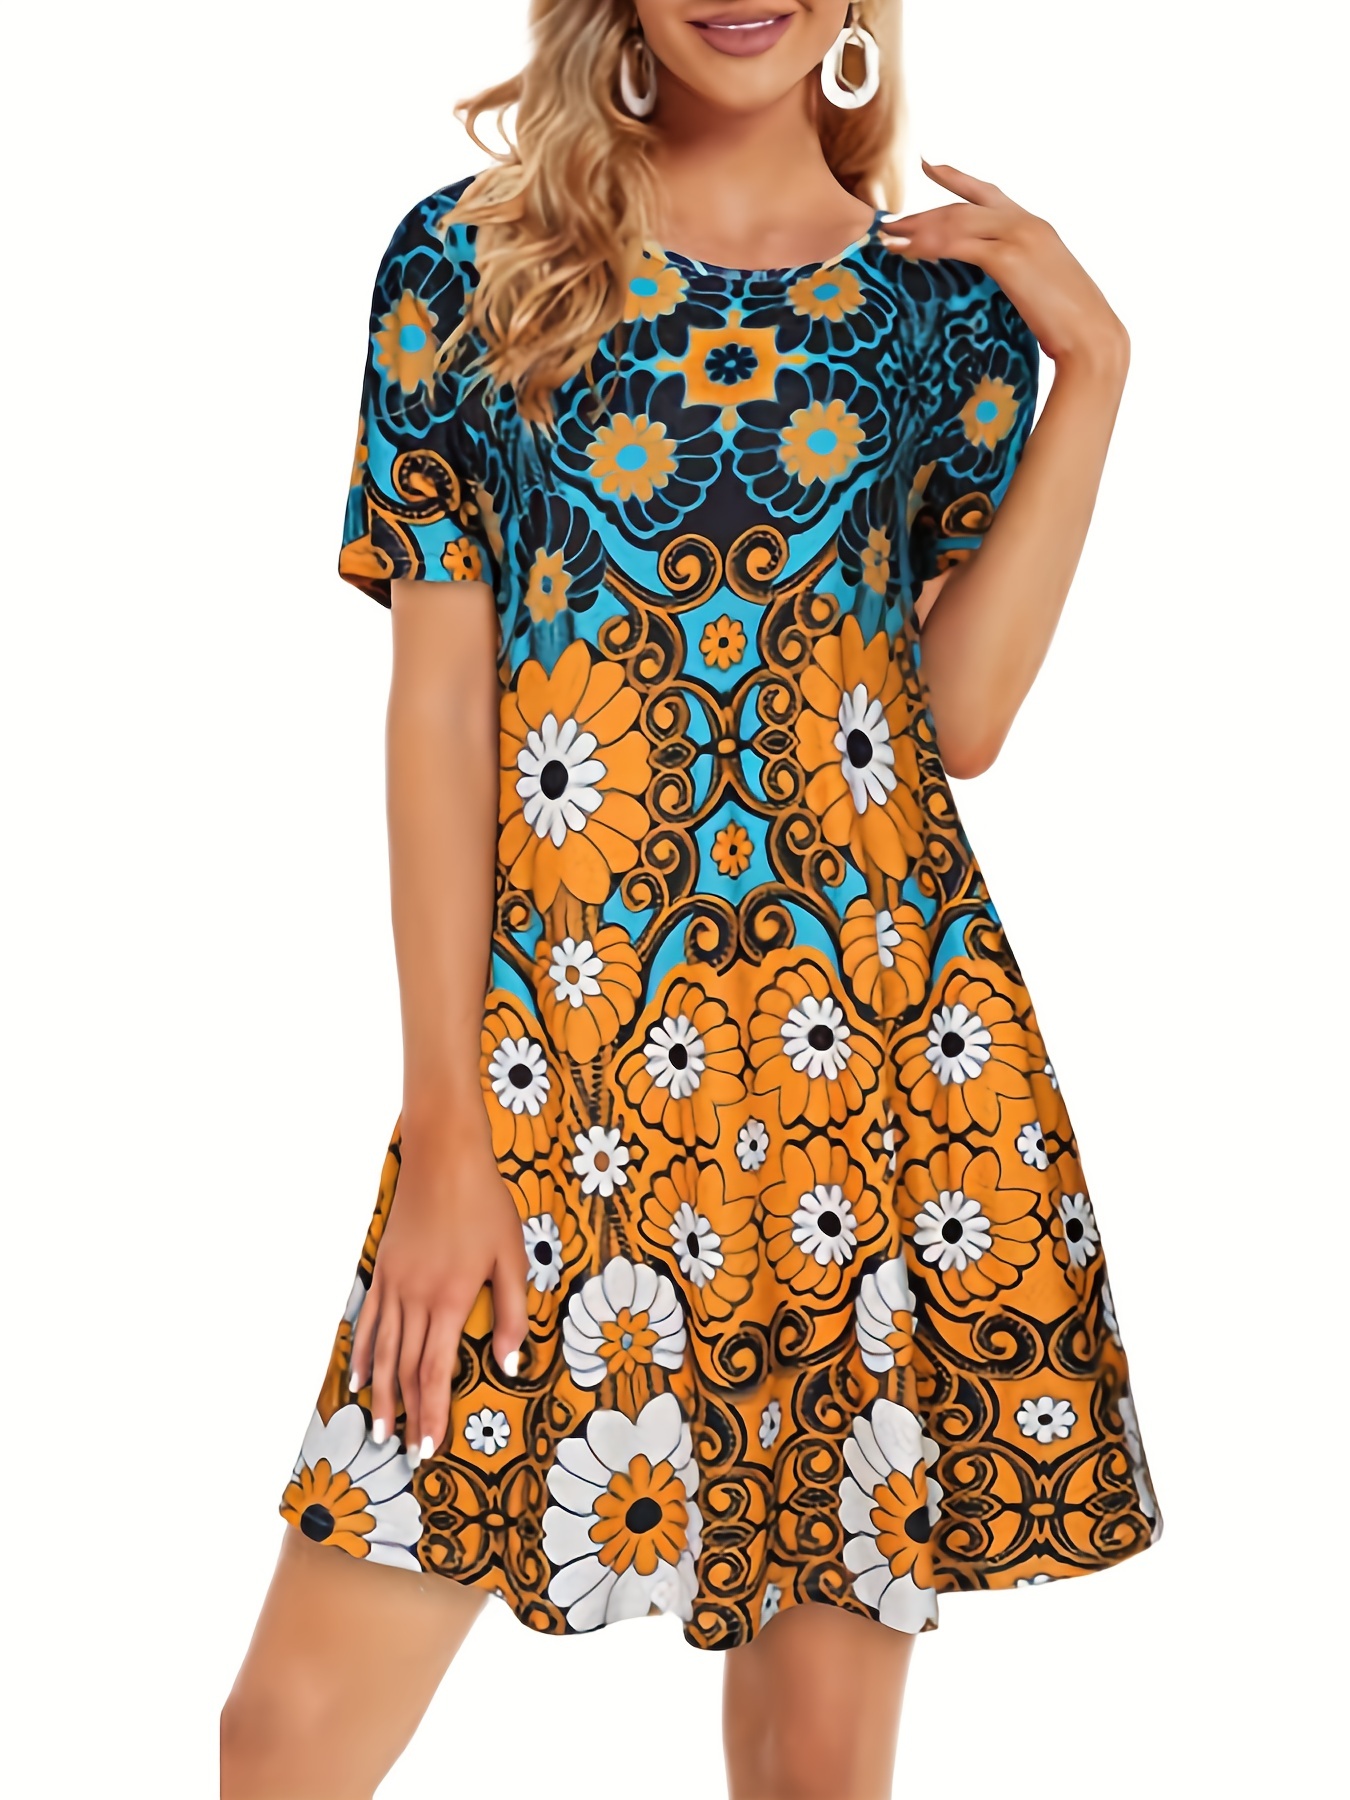 floral print crew neck dress casual short sleeve dress for spring summer womens clothing